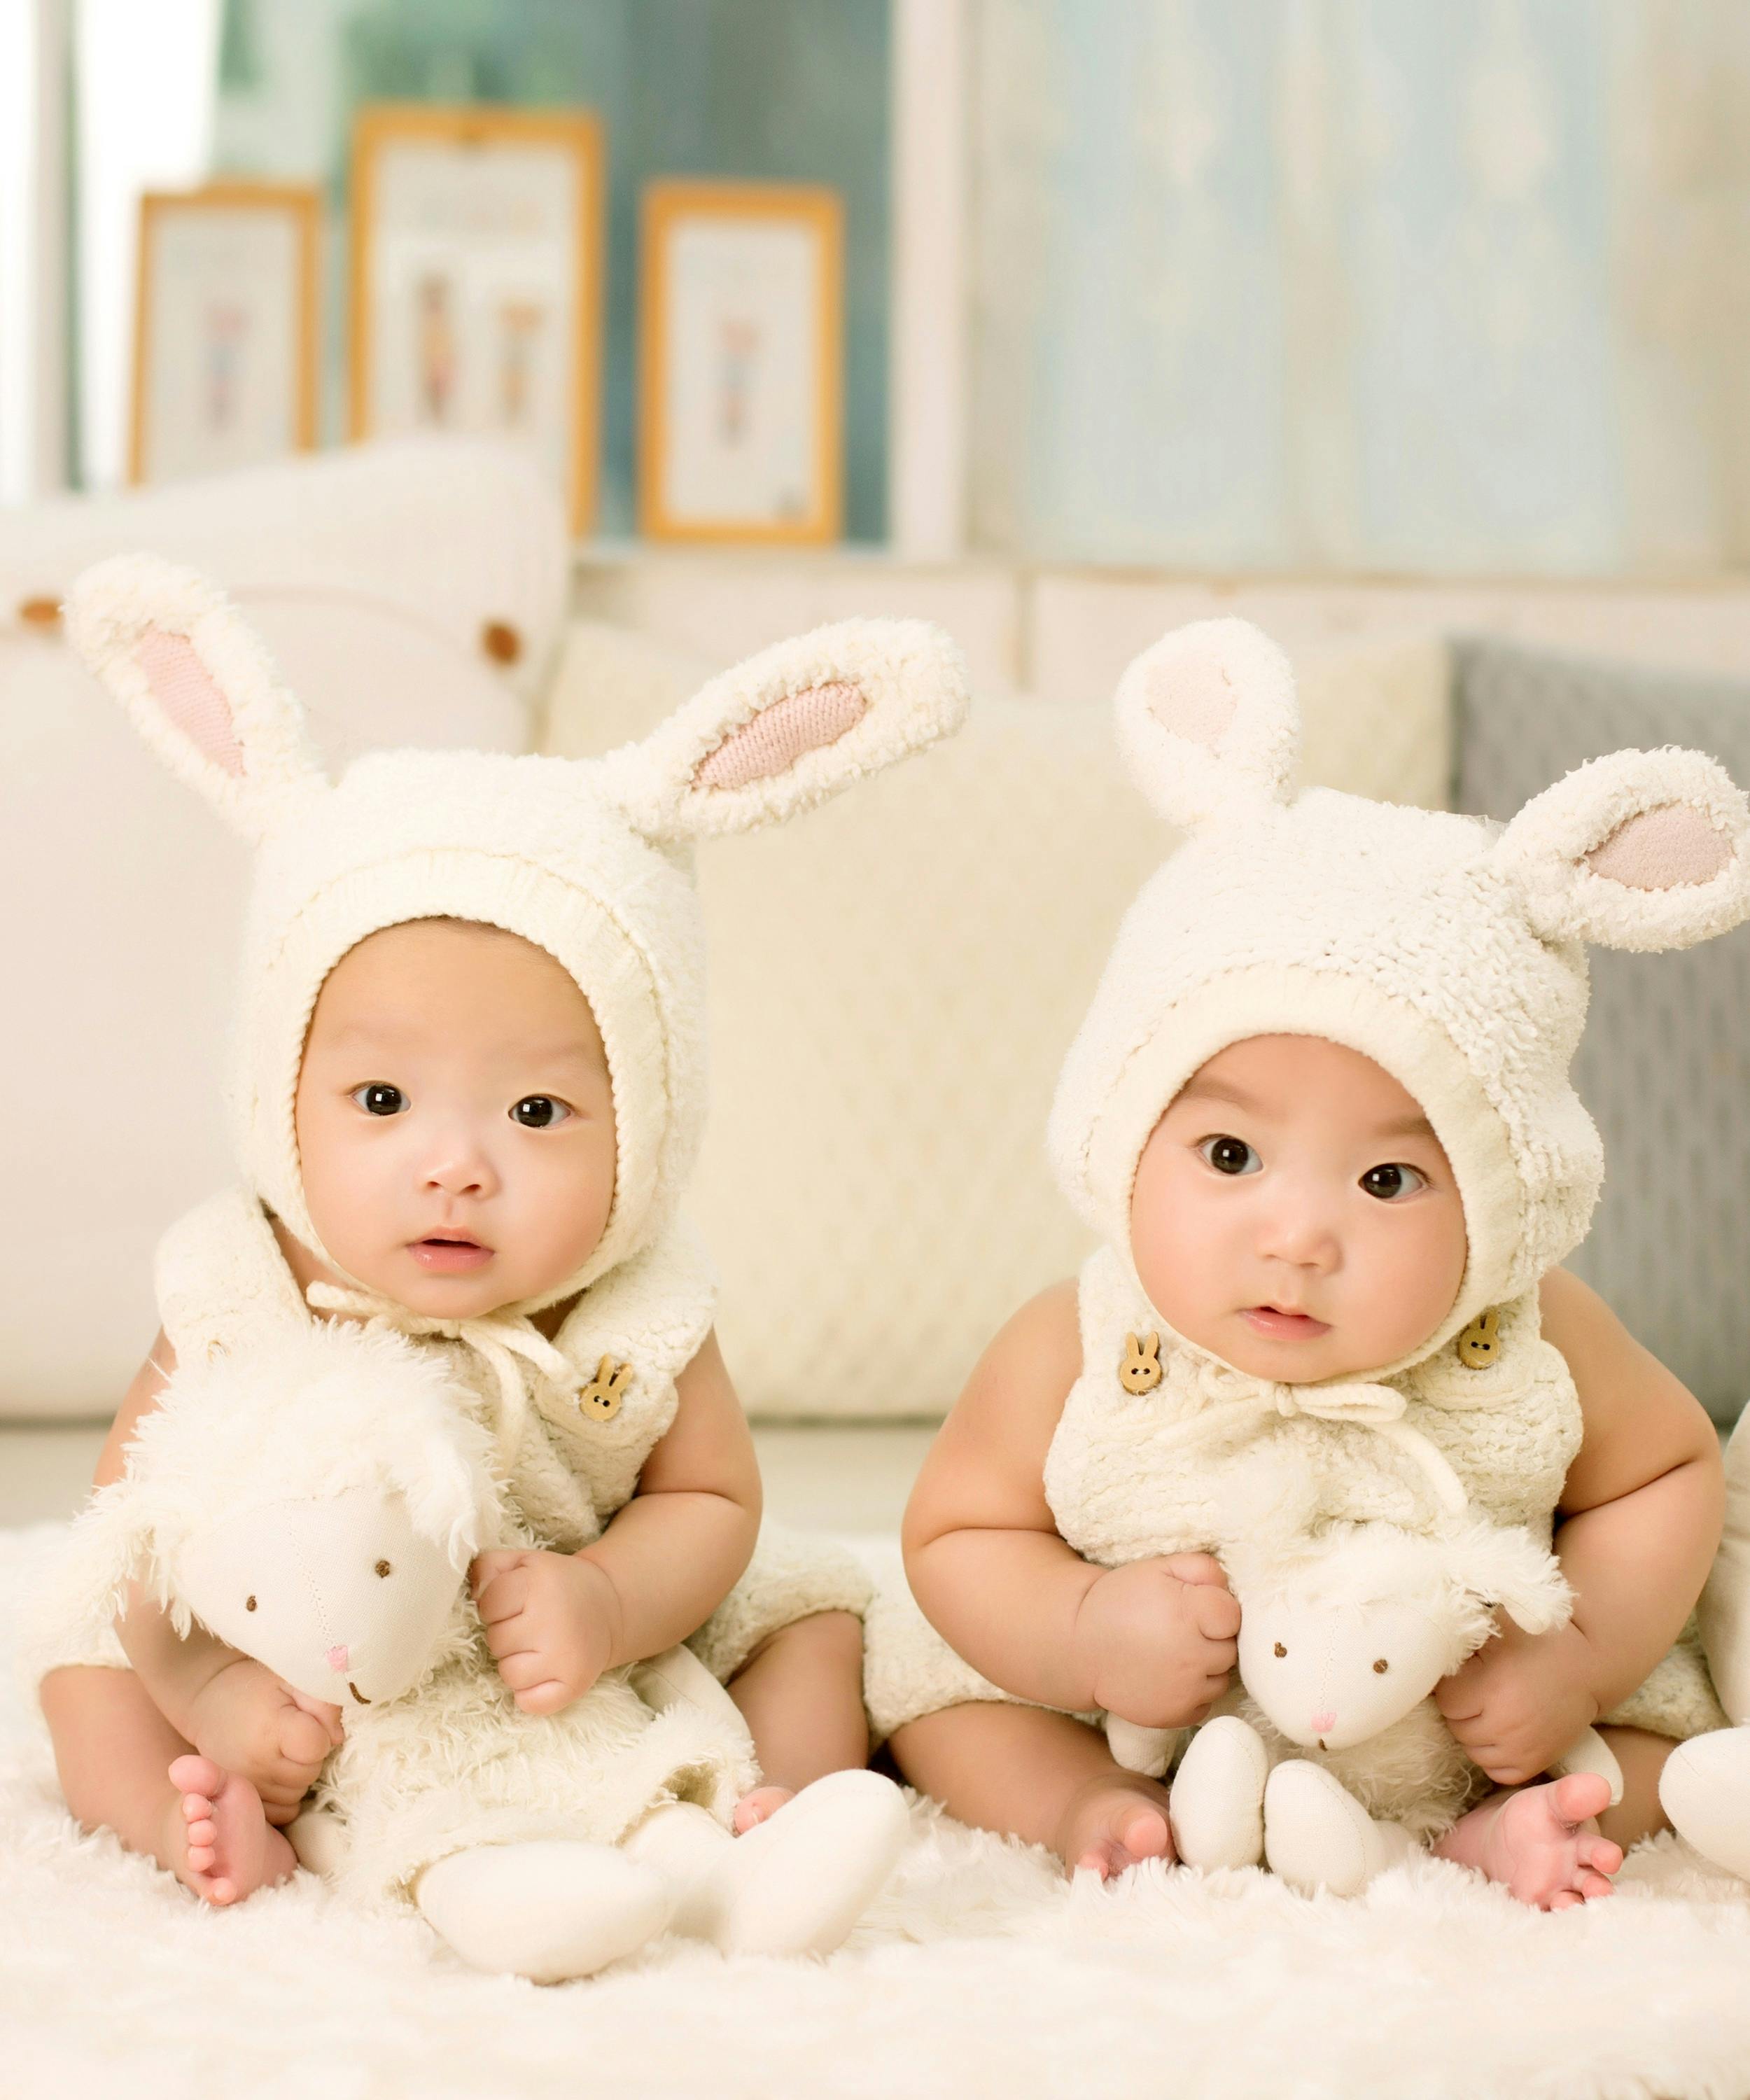 Pin by Amber McCarthy on Pictures | Twin photography, Twin baby photography,  Twin baby photos